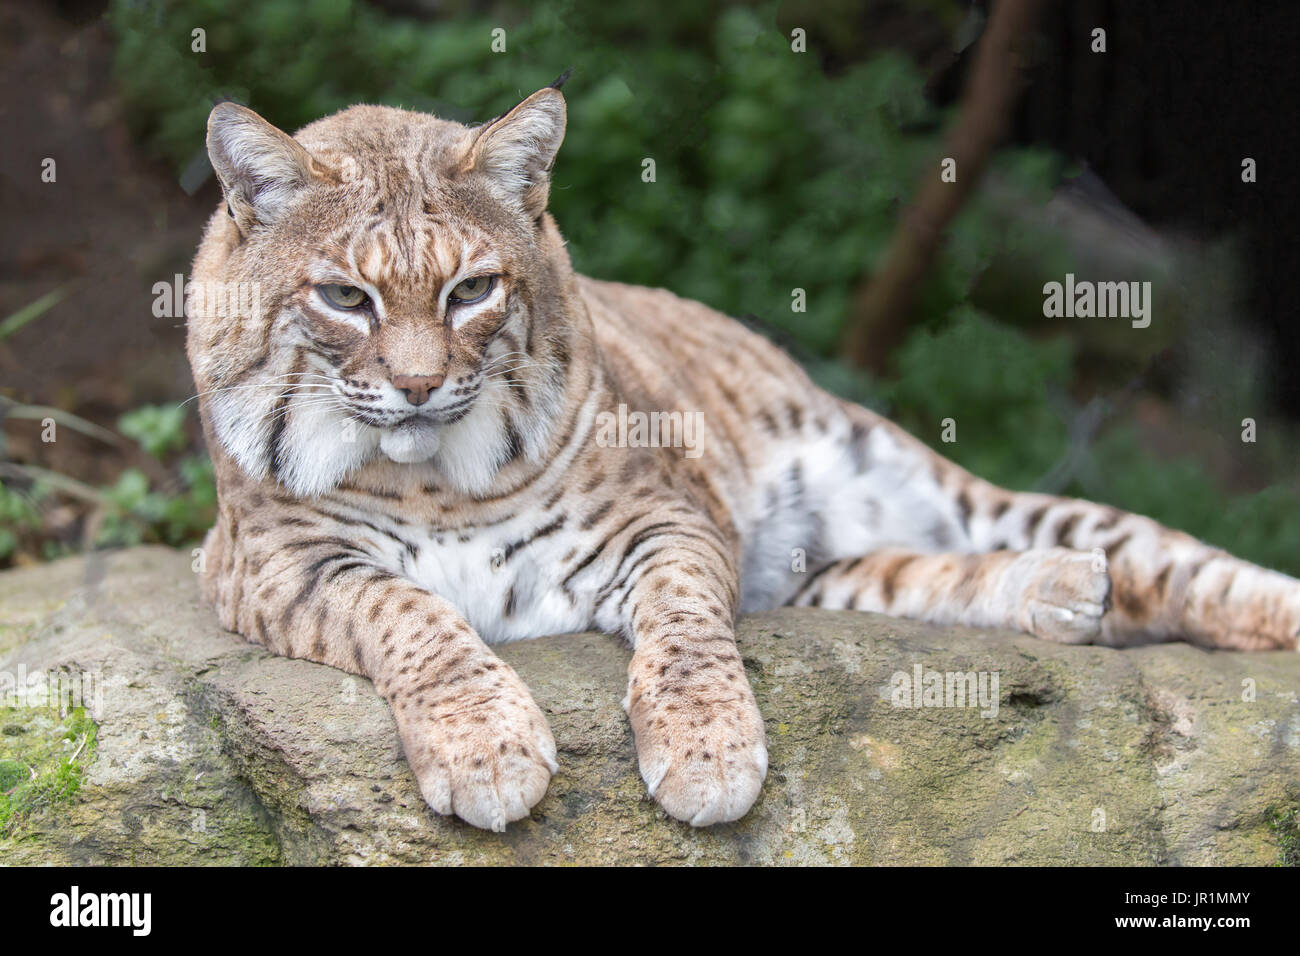 Bobcat (Lynx rufus californicus) resting on a rock and posing. Stock Photo